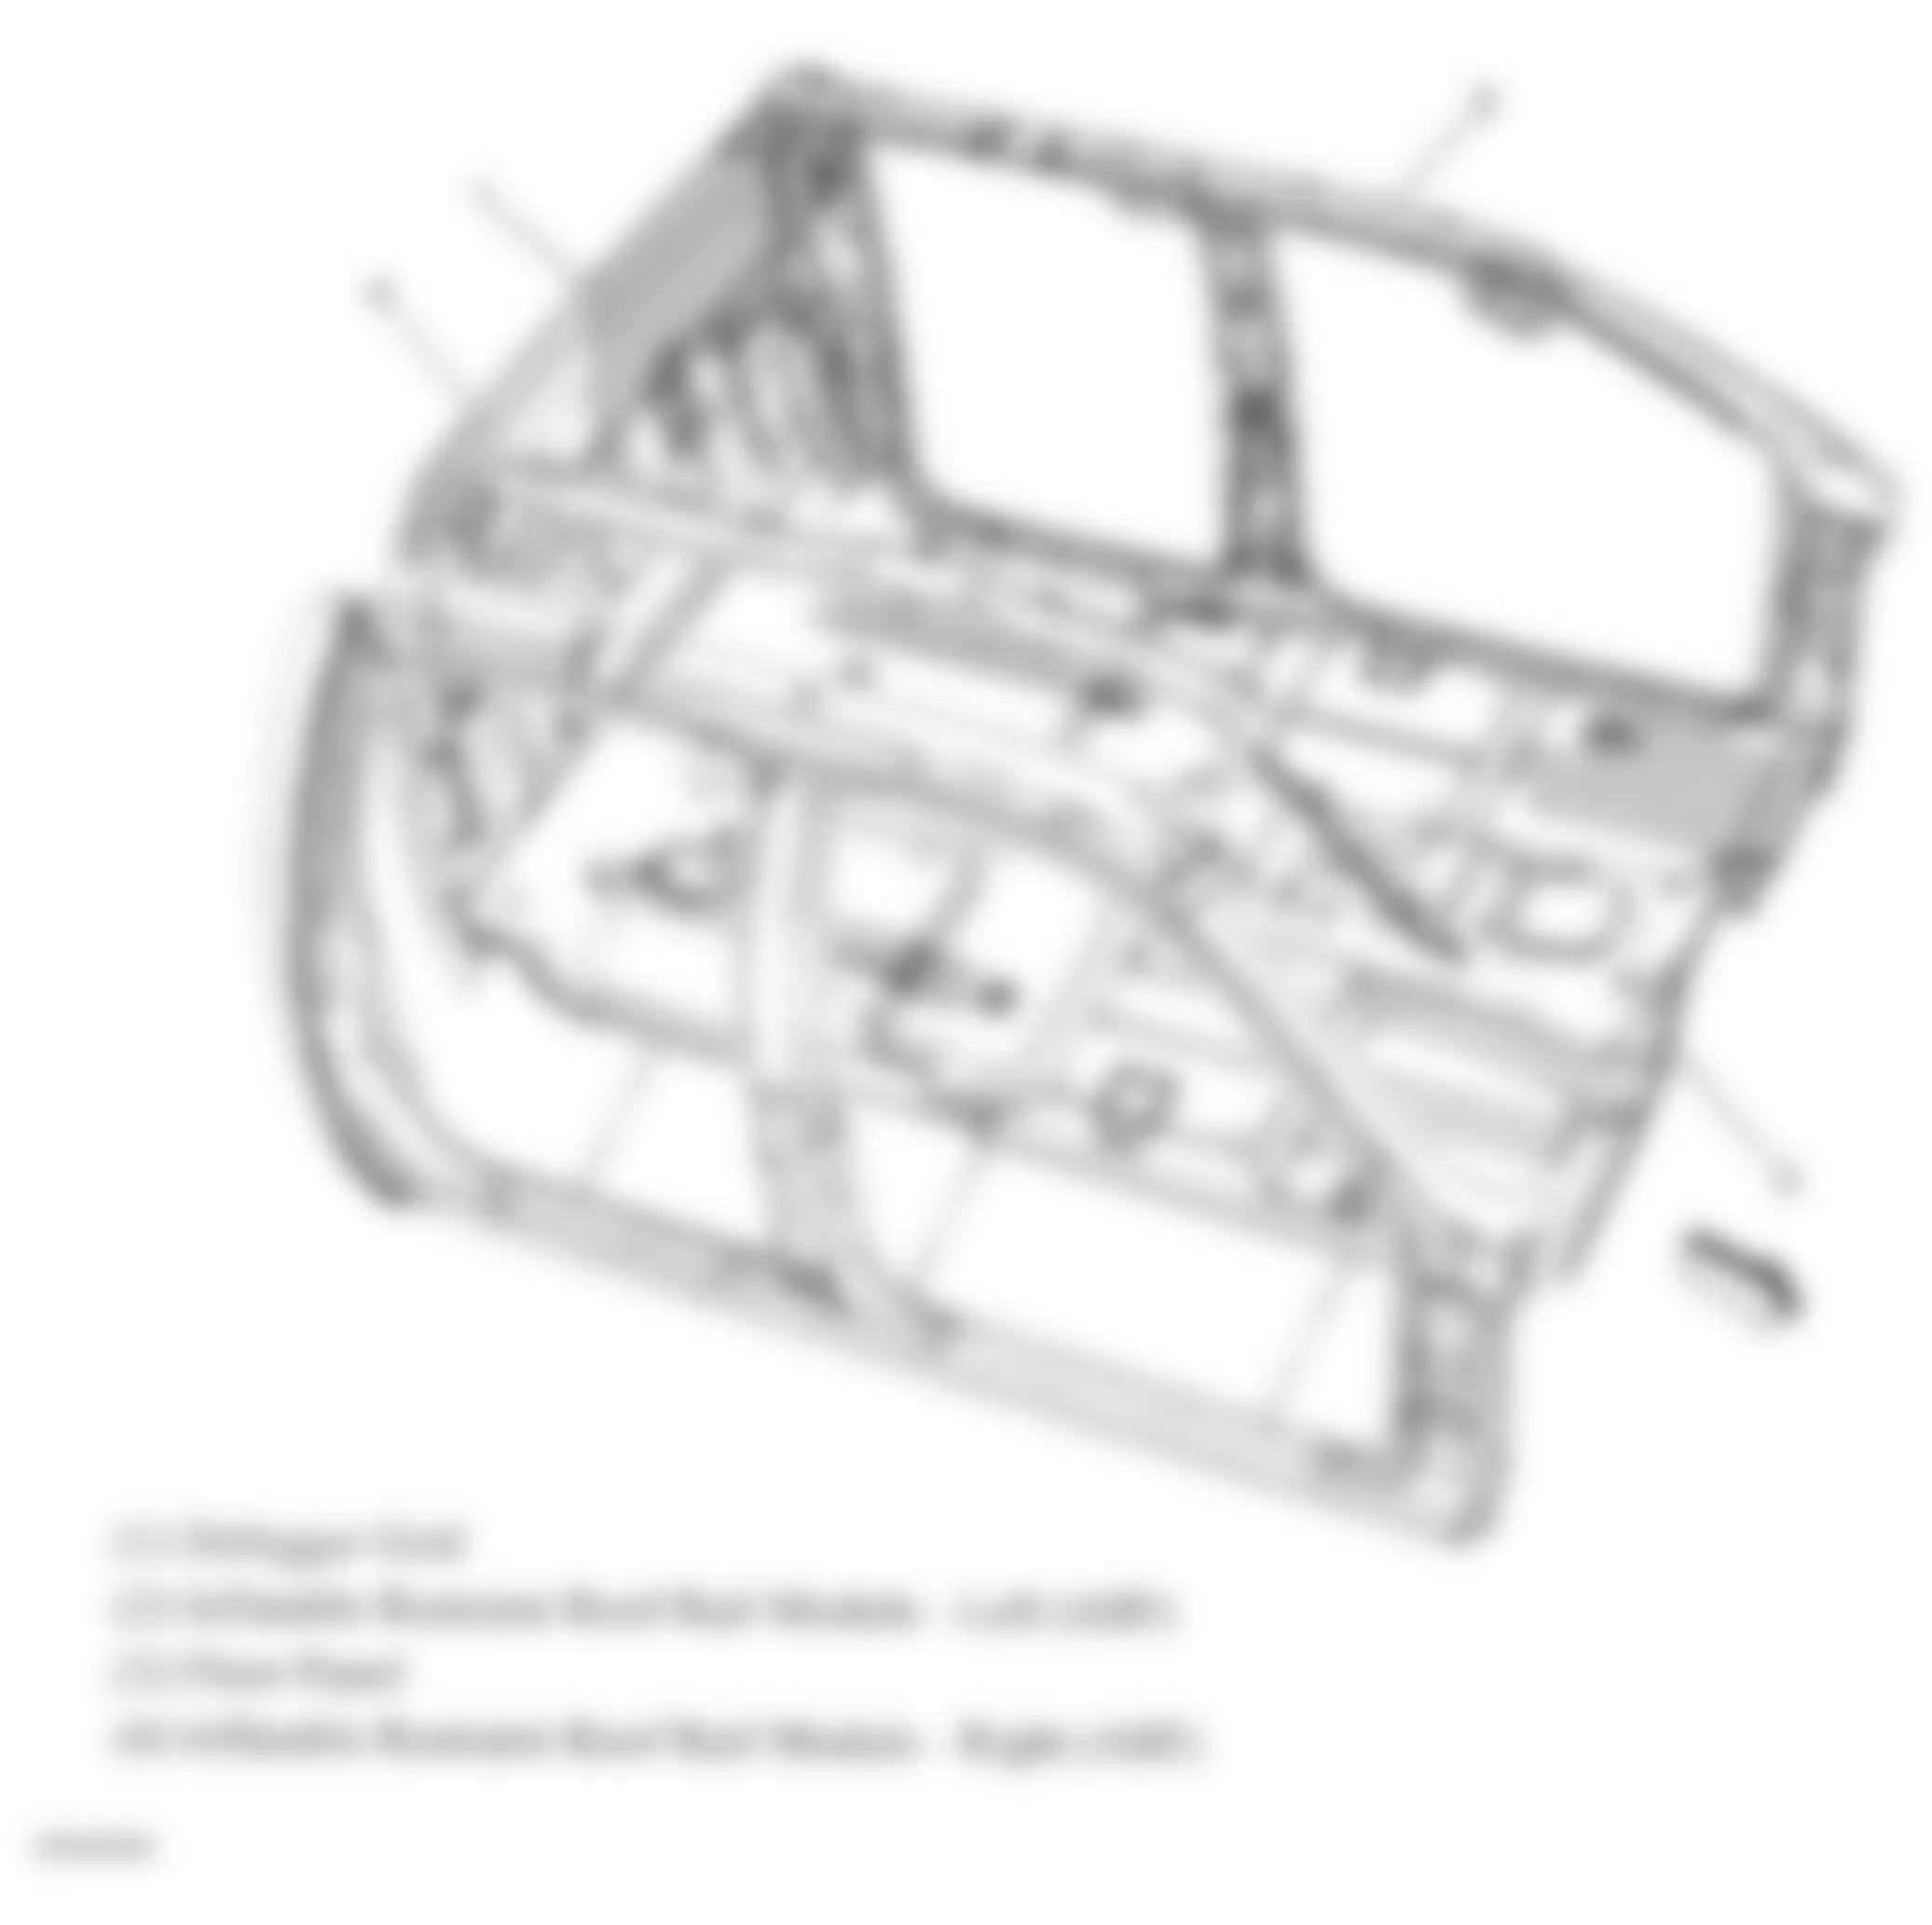 GMC Sierra 1500 2009 - Component Locations -  Roof Rail Air Bags (Extended Cab & Crew Cab)